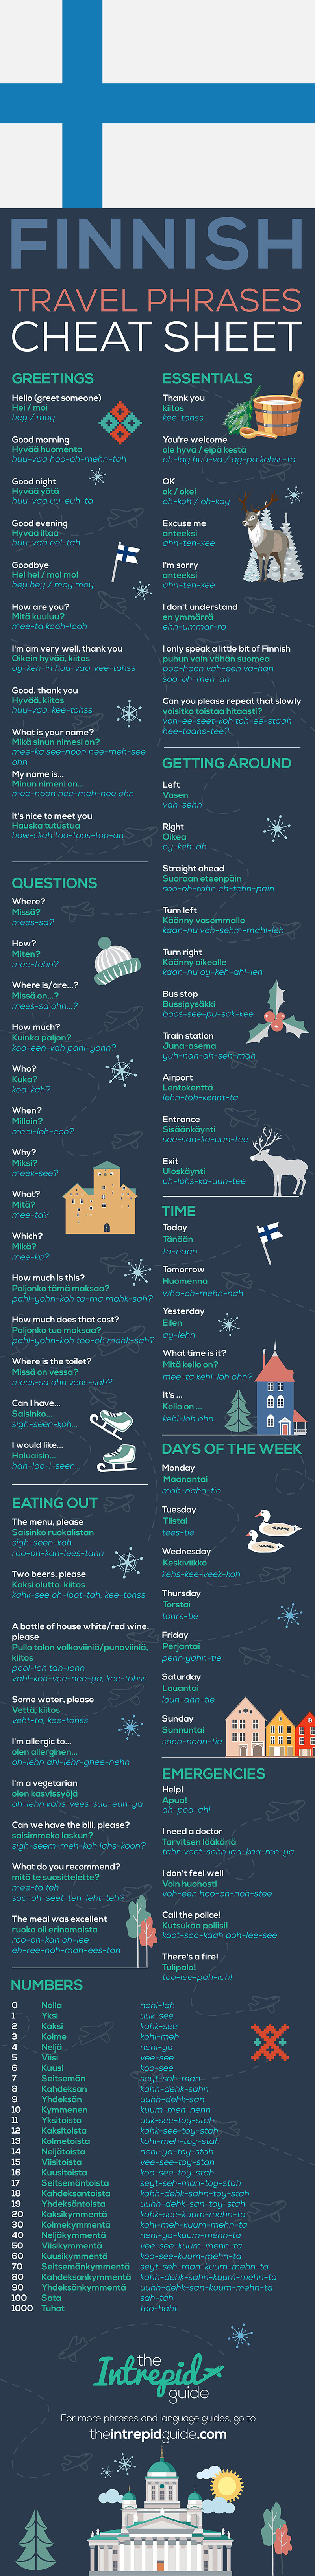 99 Useful Phrases in Finnish Perfect for Tourists - Infographic